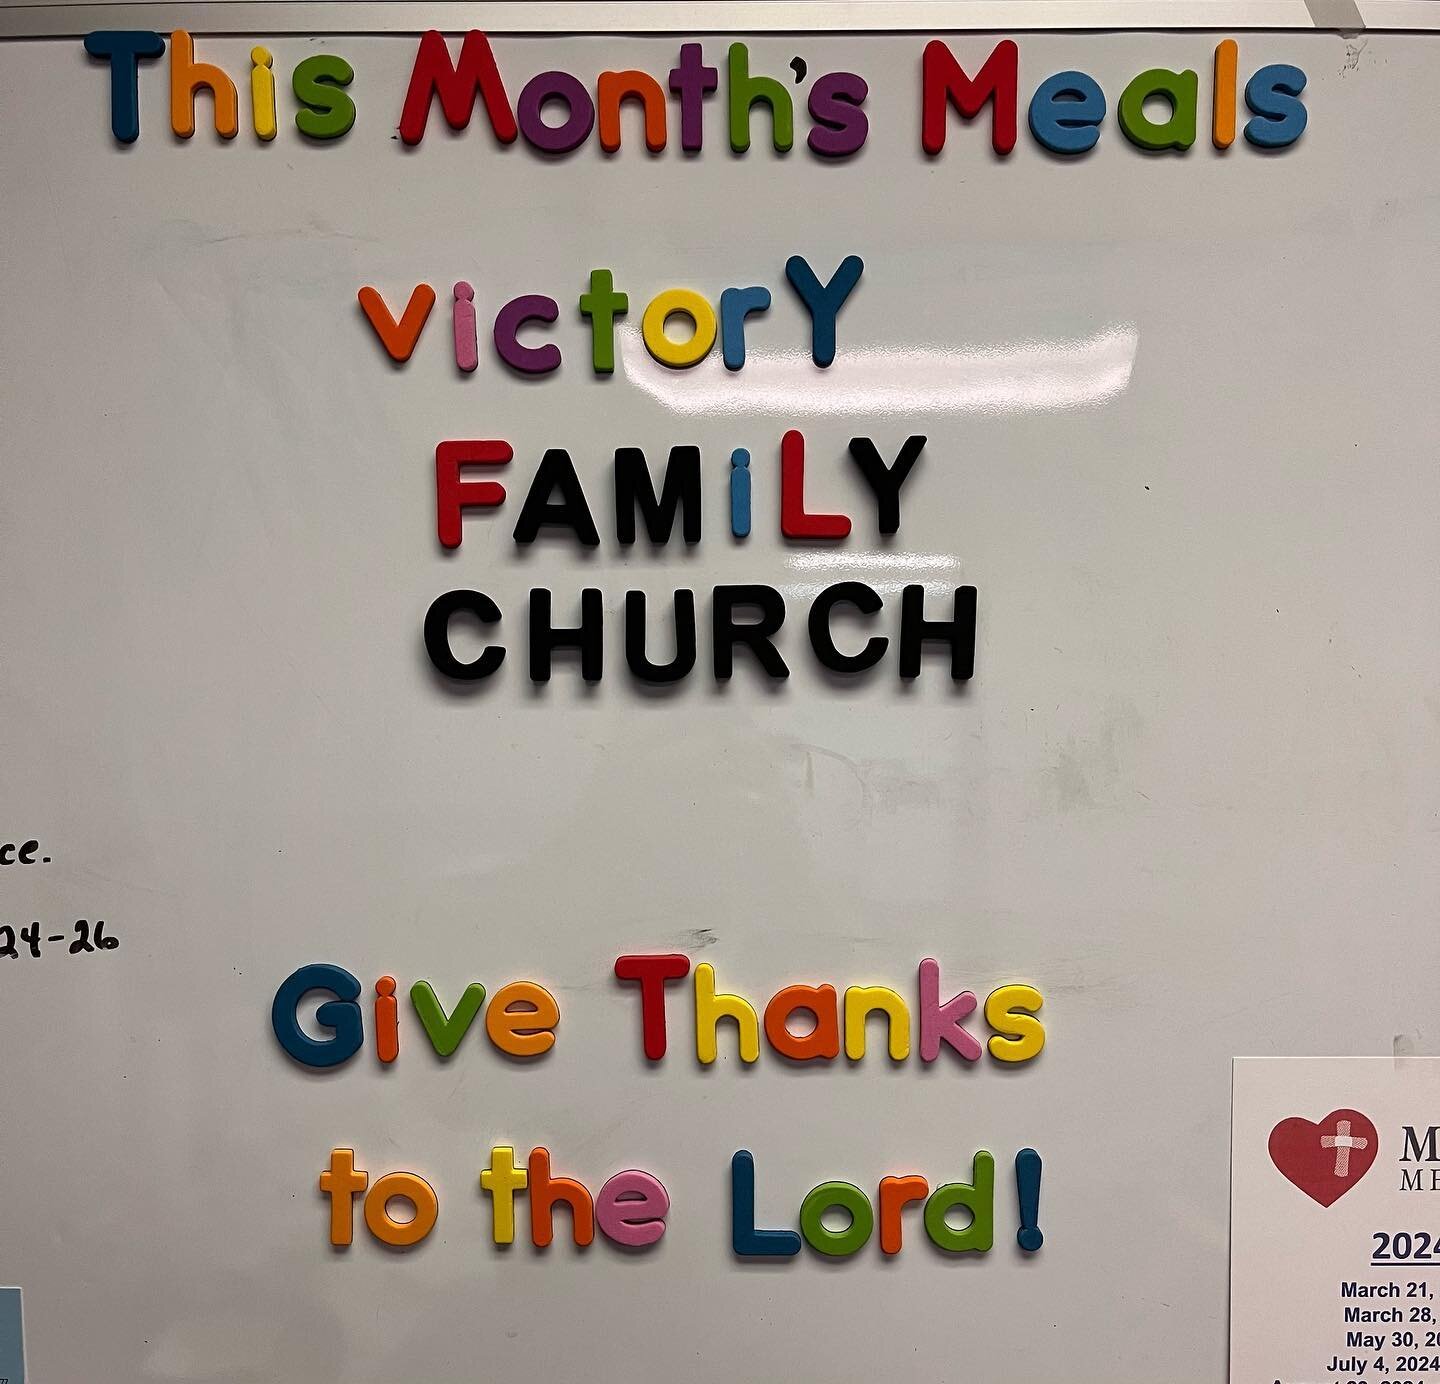 Thank you Victory family church for providing dinner tonight and Gracie for delivering Slim Chickens! We are so blessed by our city partnerships!! #loveyourneighbor #healthcare #hishandsandfeet #community #partnership